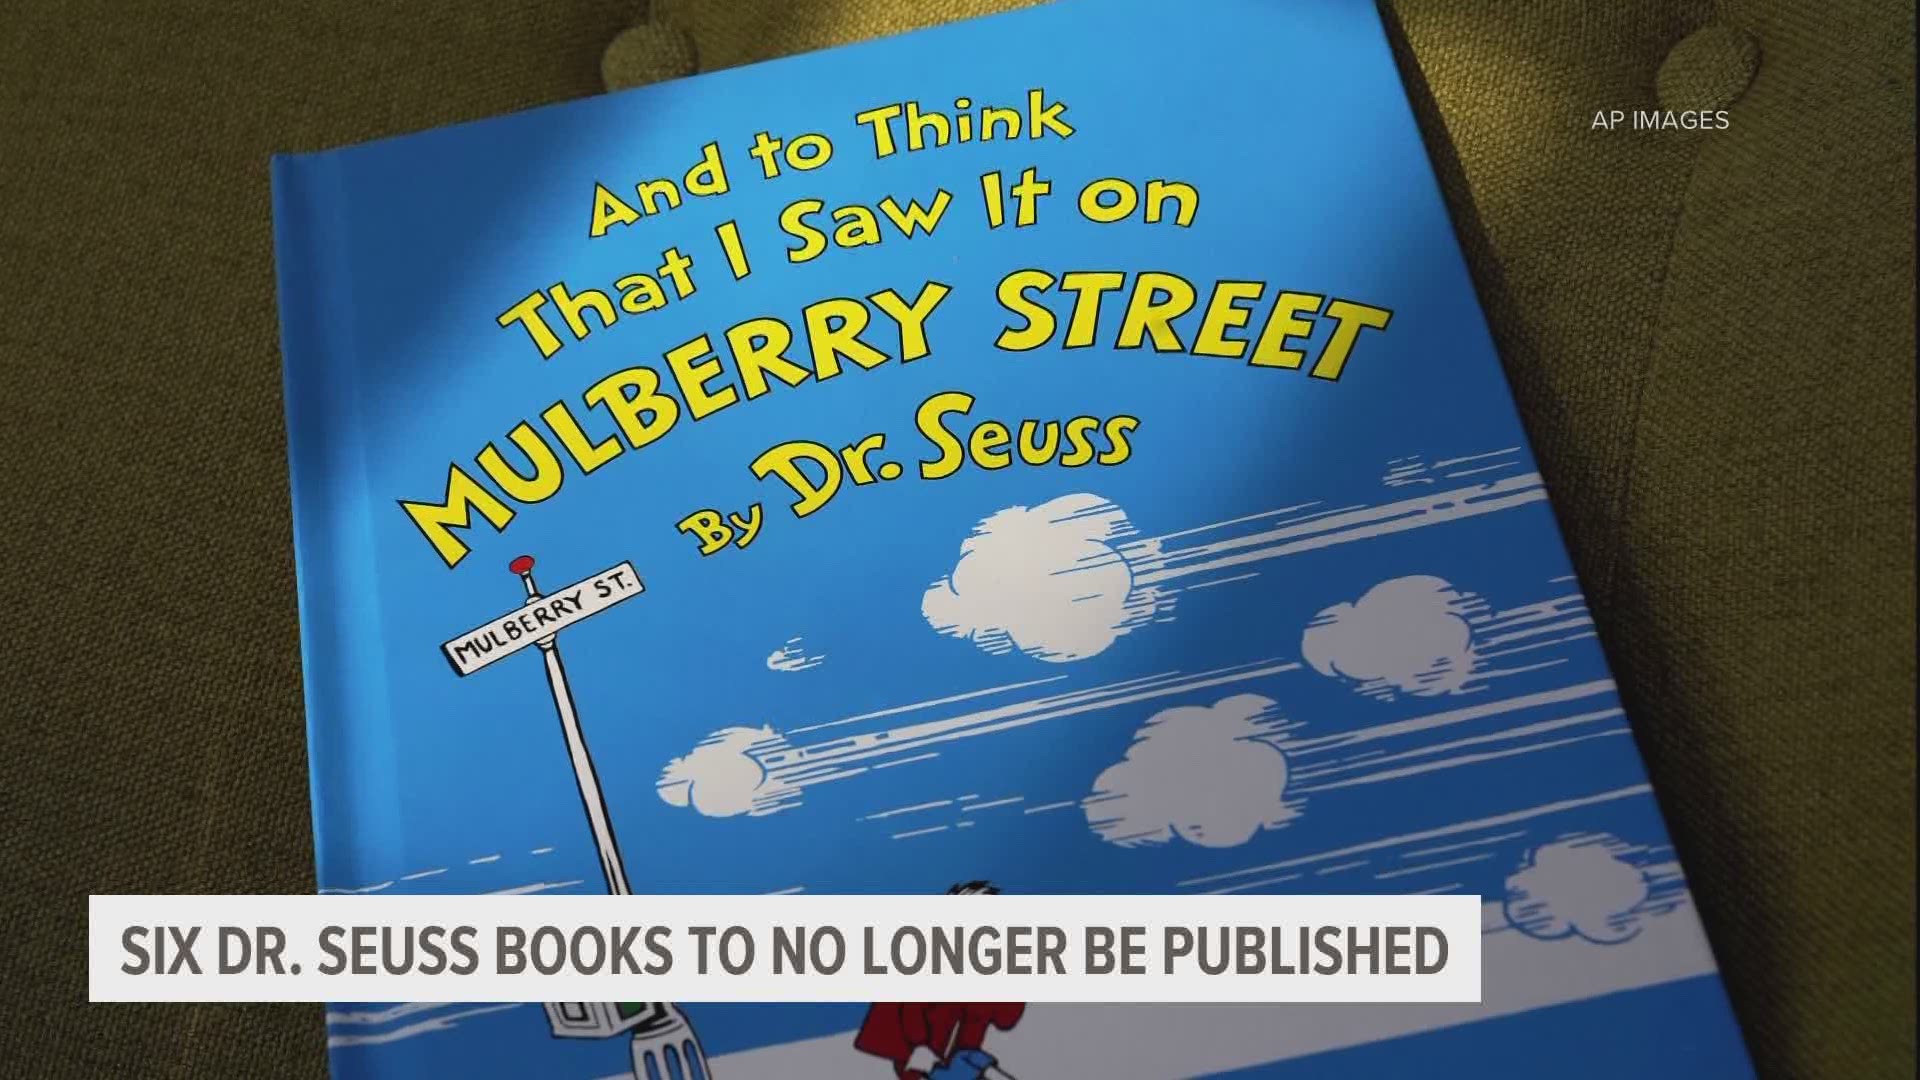 Dr. Seuss Enterprises says the decision to cease publication of Seuss books including “And to Think That I Saw It on Mulberry Street” follows months of deliberation.